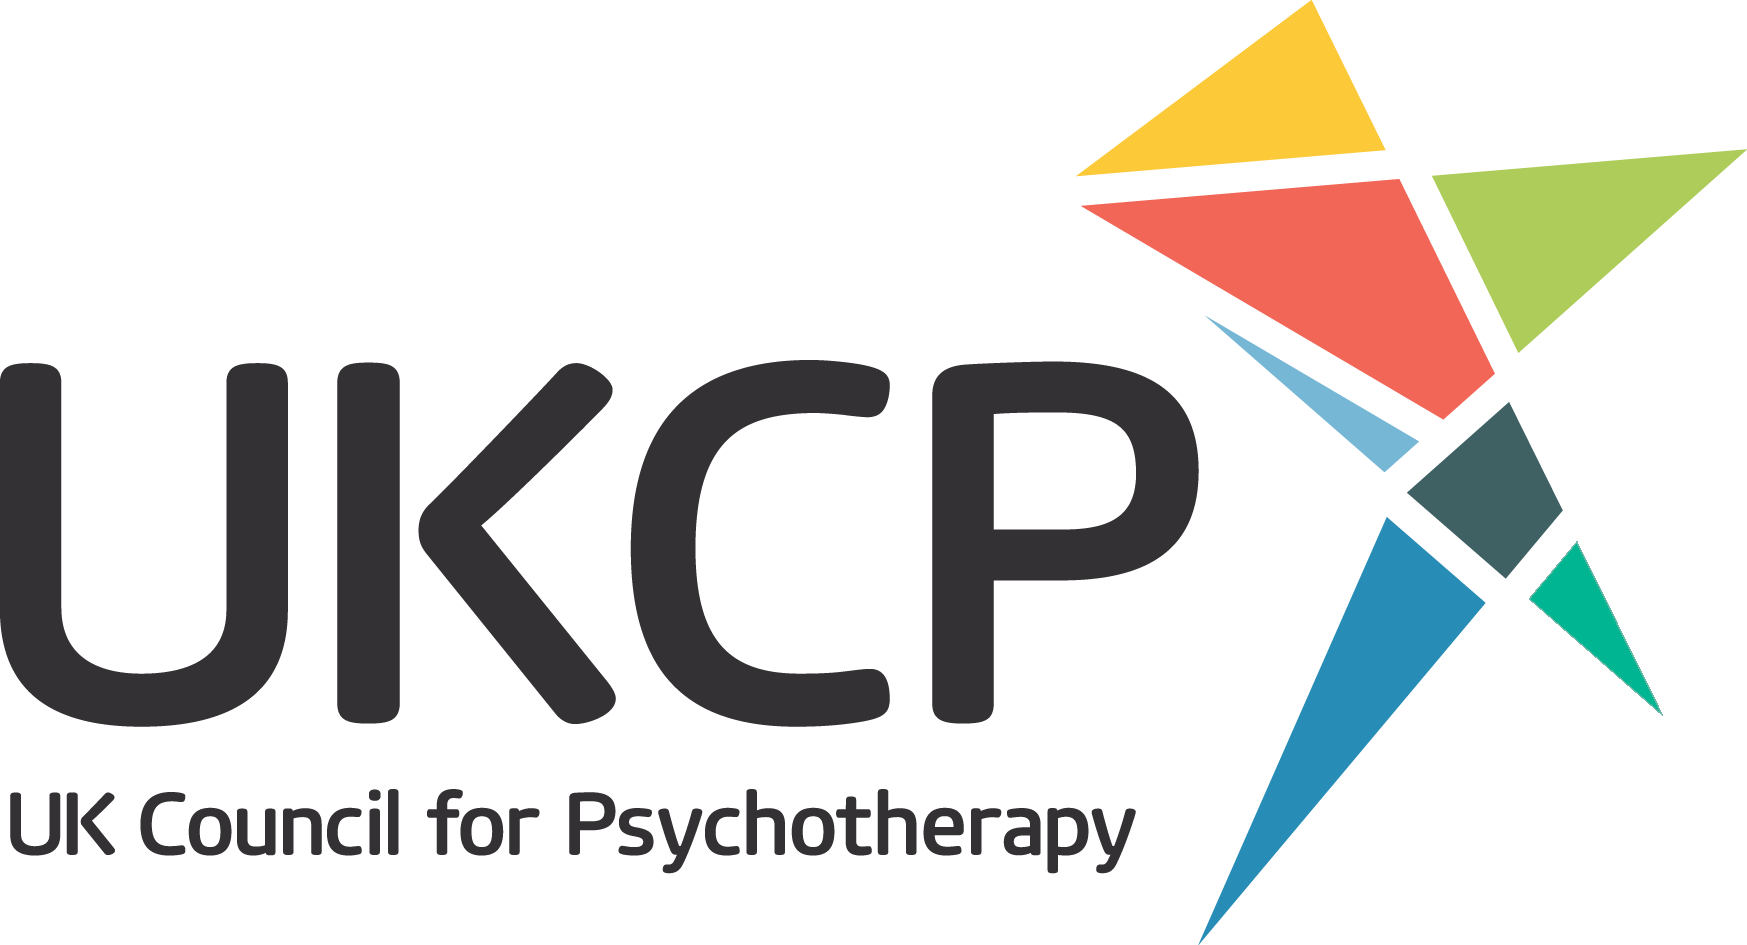 Registered member of the UK Council for Psychotherapy